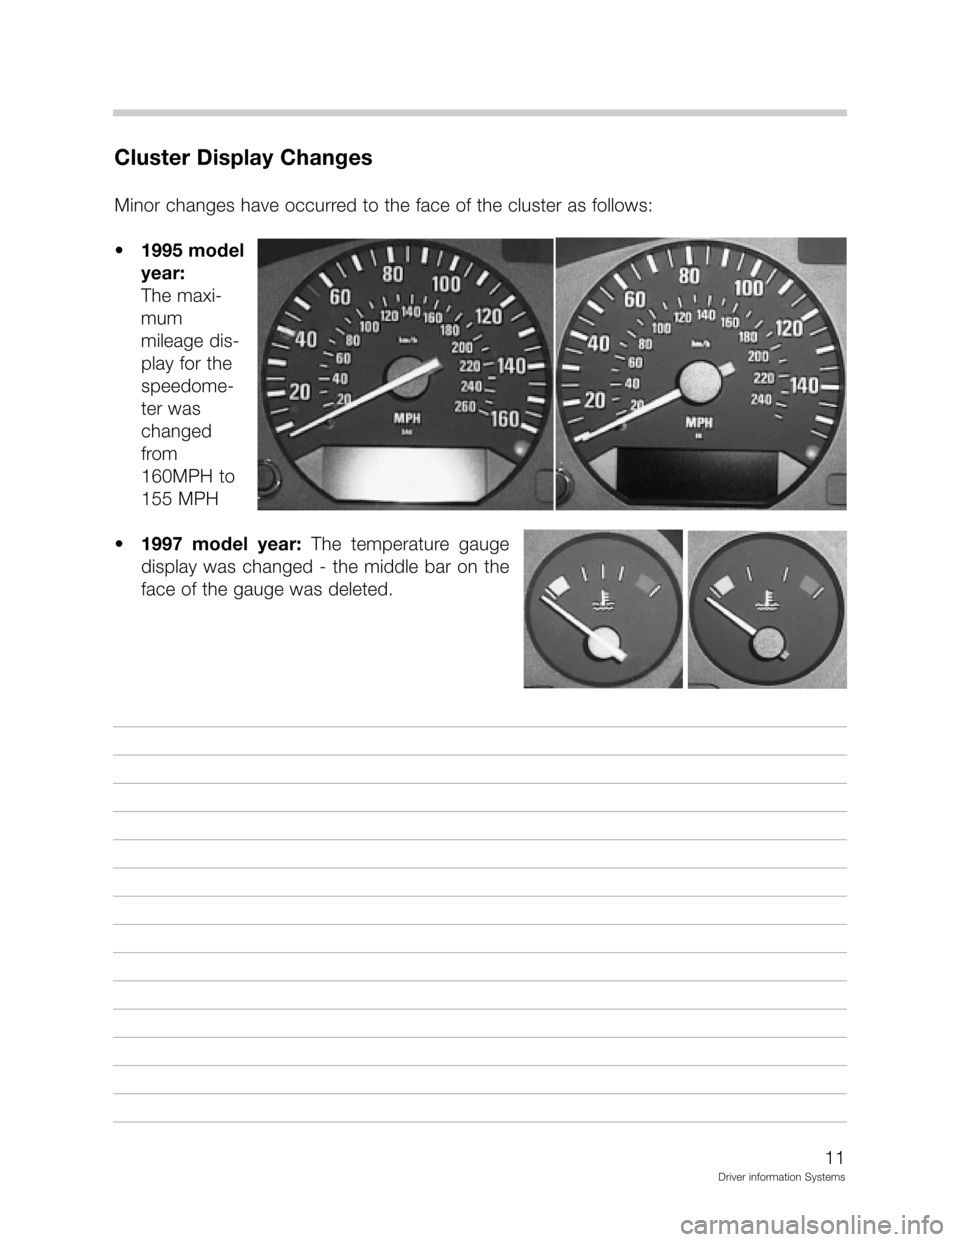 BMW Z3 ROADSTER 1998 E36 Driver Information Systems Manual 	-+	
&2	!;;
	;

:>
?9==6
	
	3

F

	



!

;
!

:
!
;

(&+7
%%&+7
?9